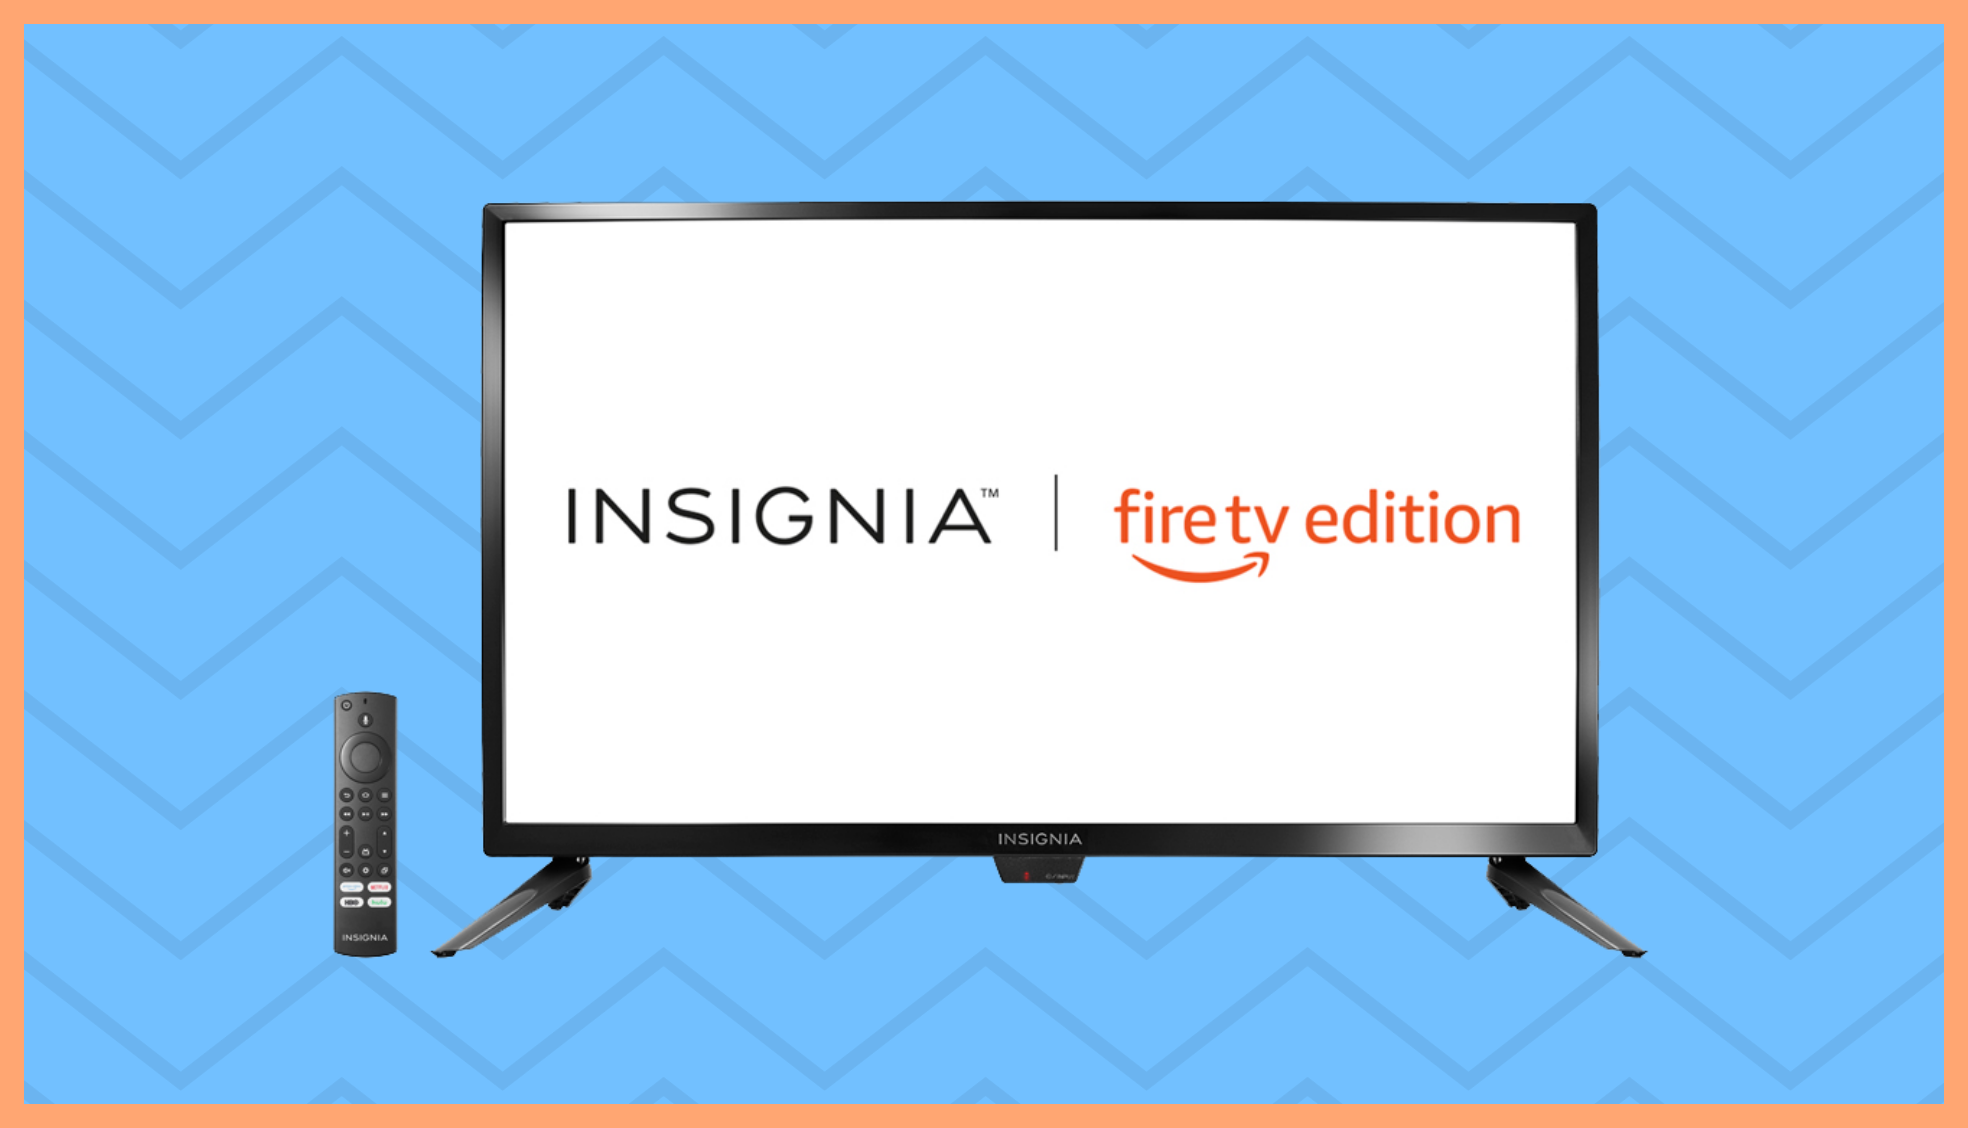 Insignia 4K Ultra HD 39-inch TV – Fire TV edition is on sale on Amazon